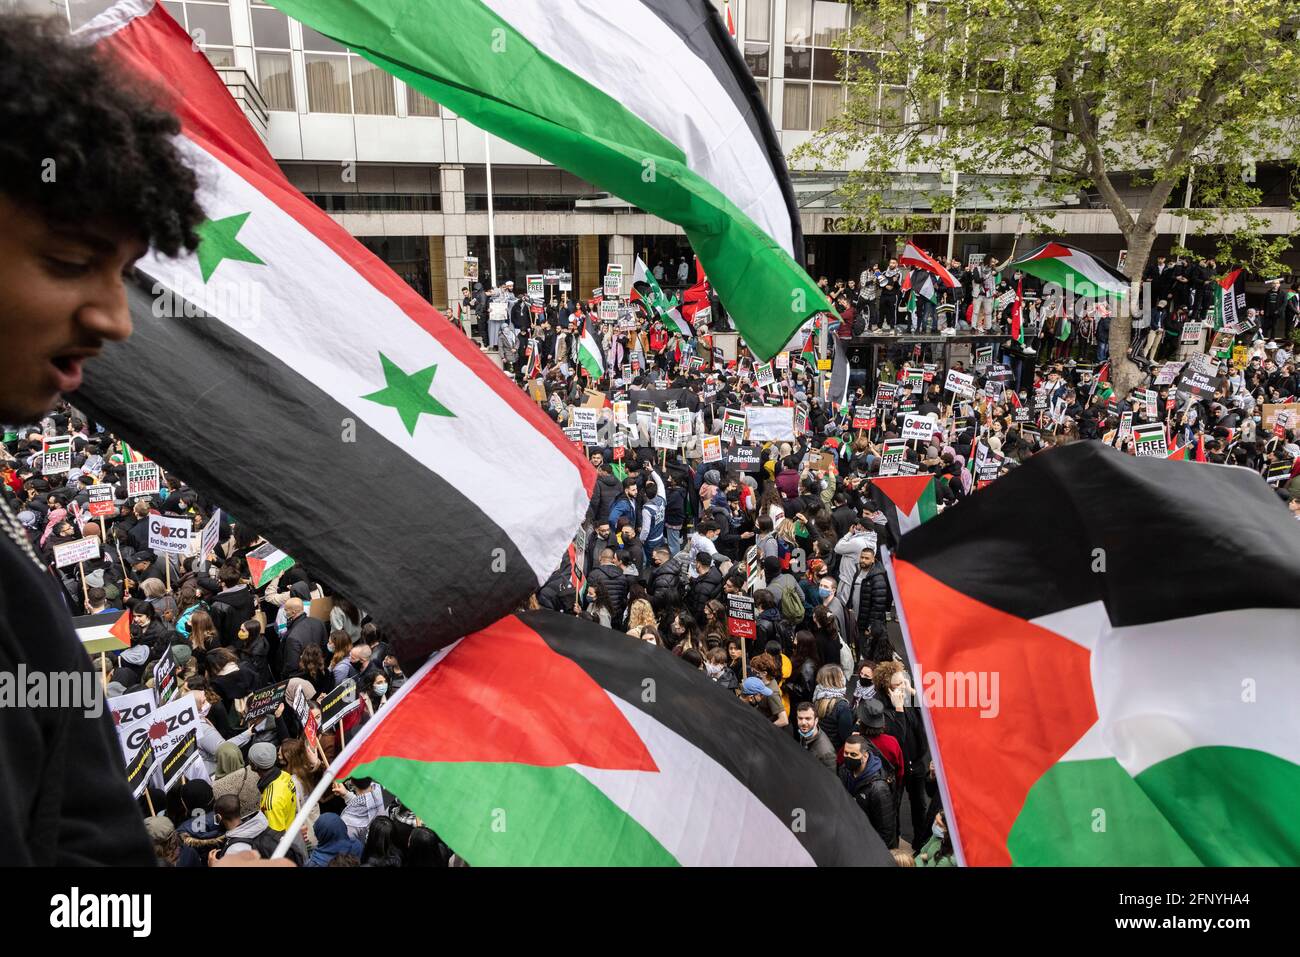 Flags flying above a crowd, 'Free Palestine' solidarity protest, London, 15 May 2021 Stock Photo